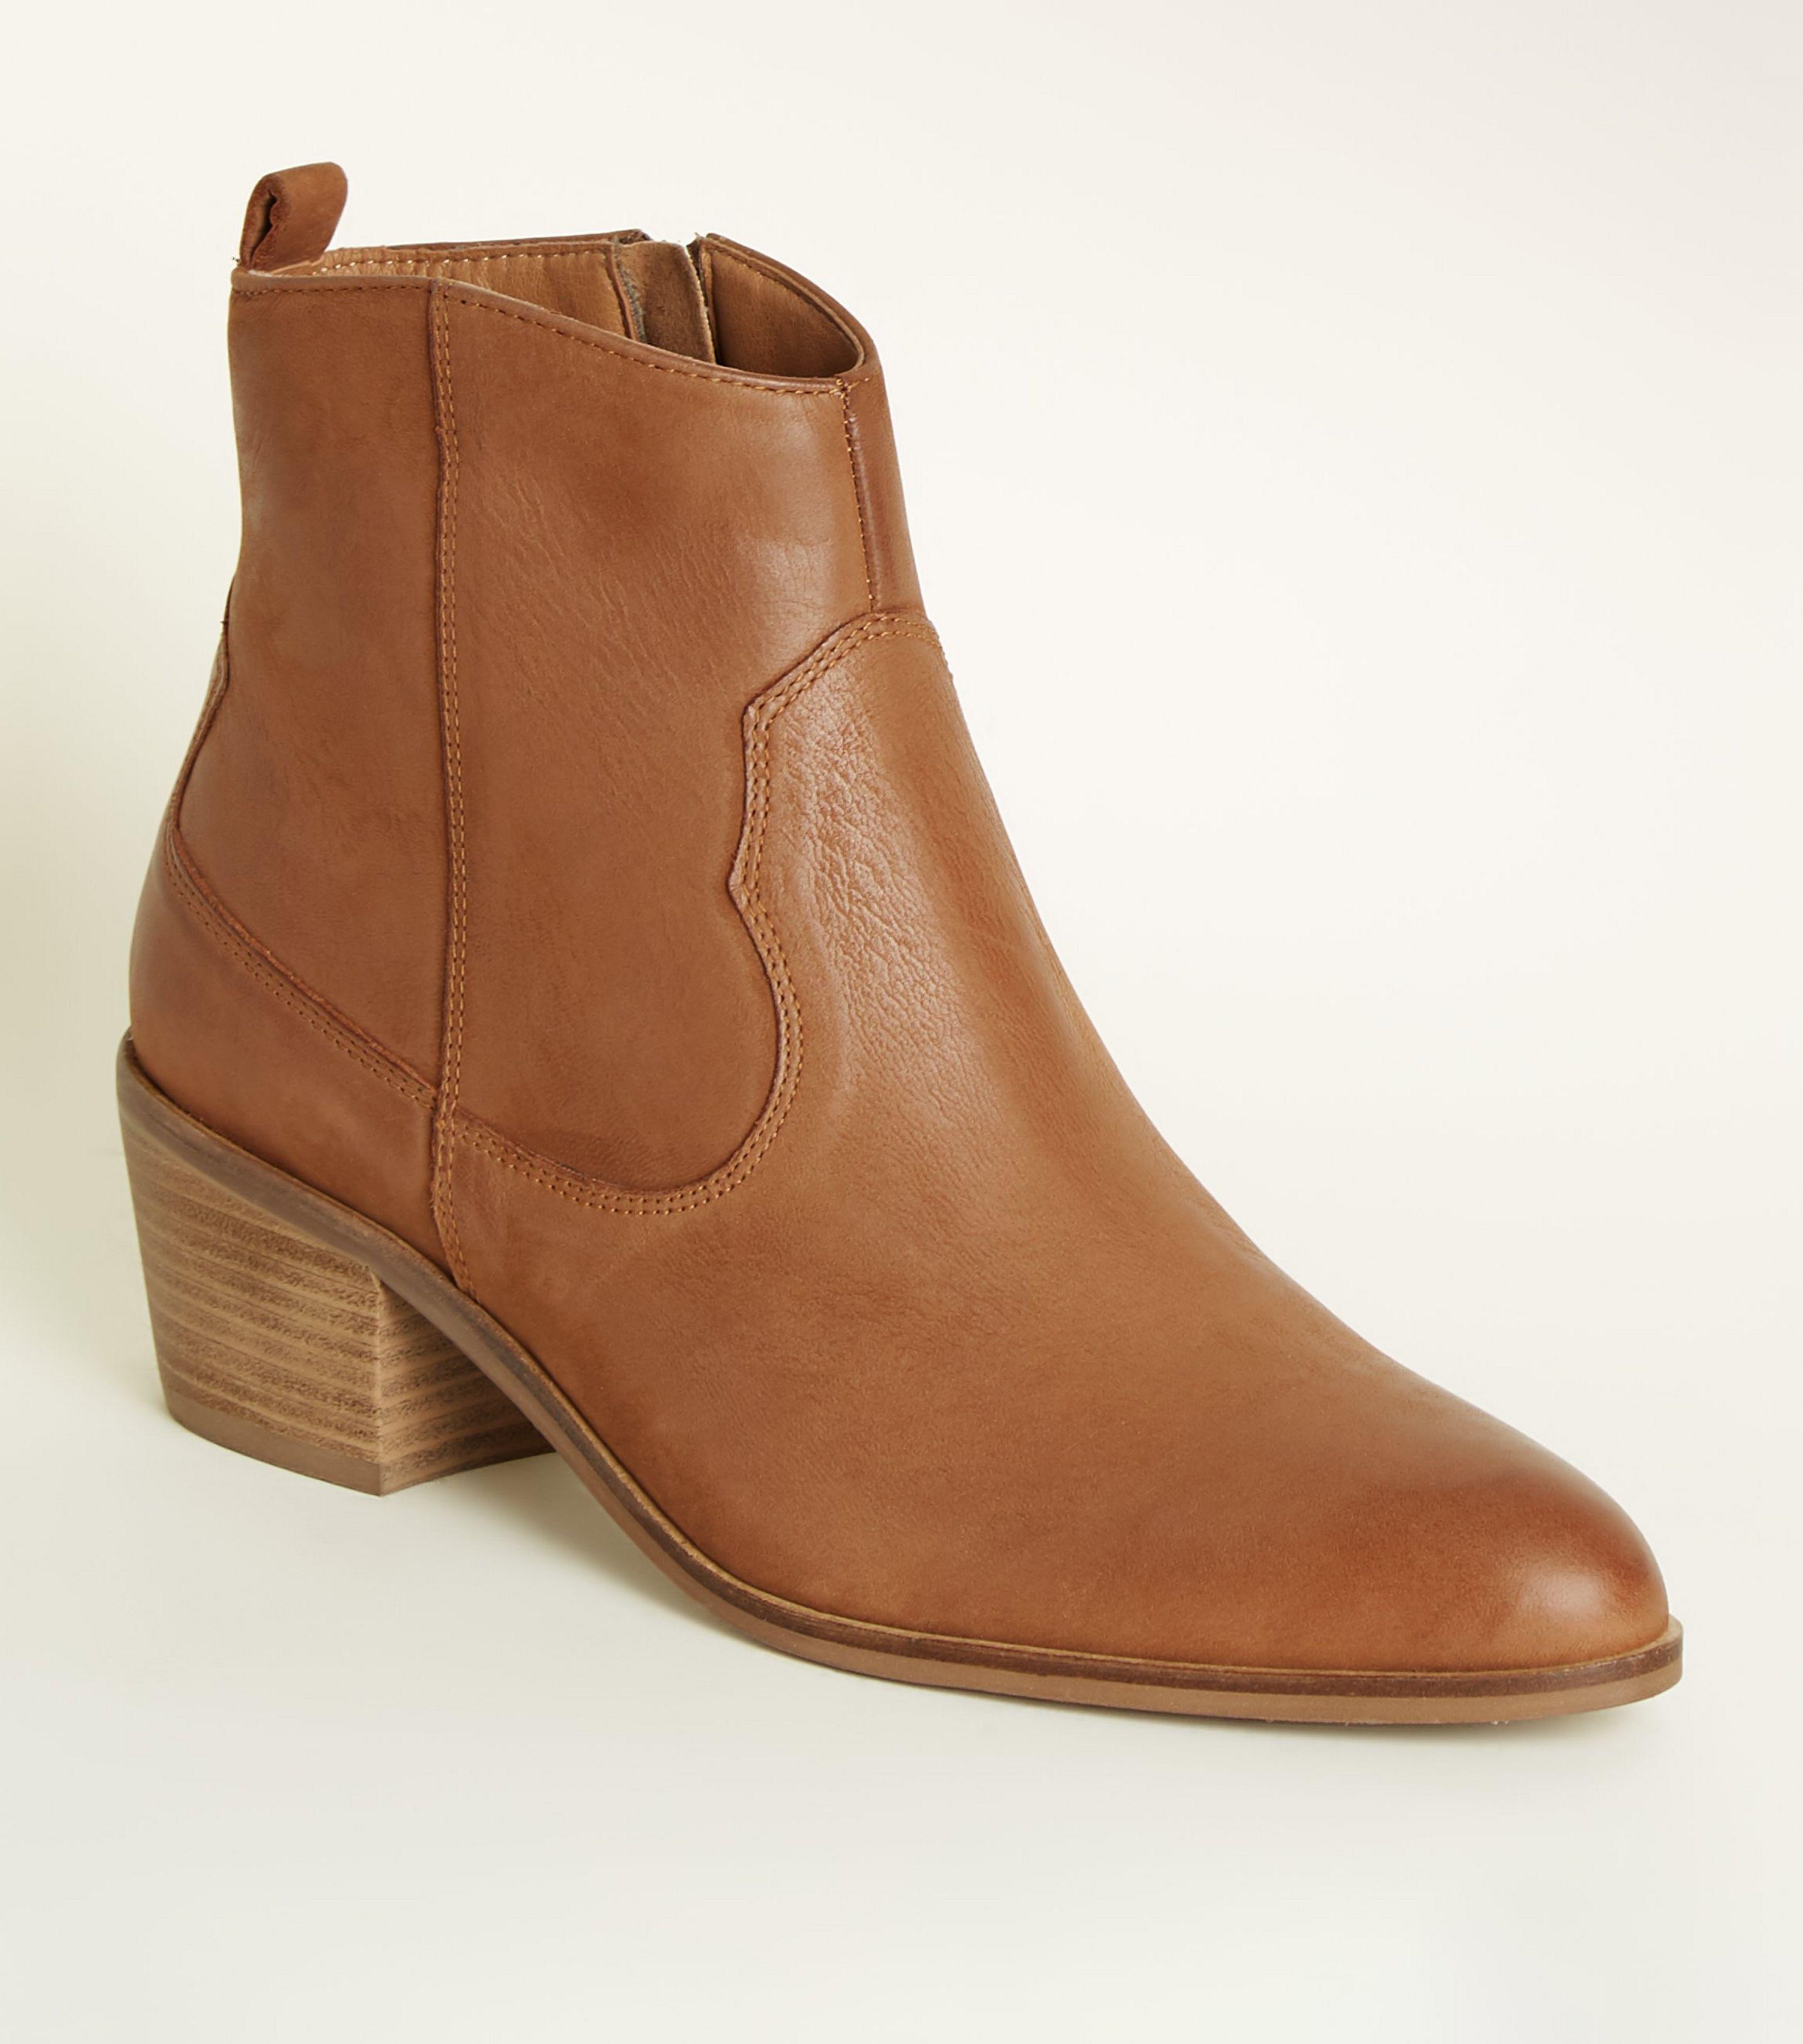 new-look-tan-Tan-Leather-Western-Ankle-Boots.jpeg